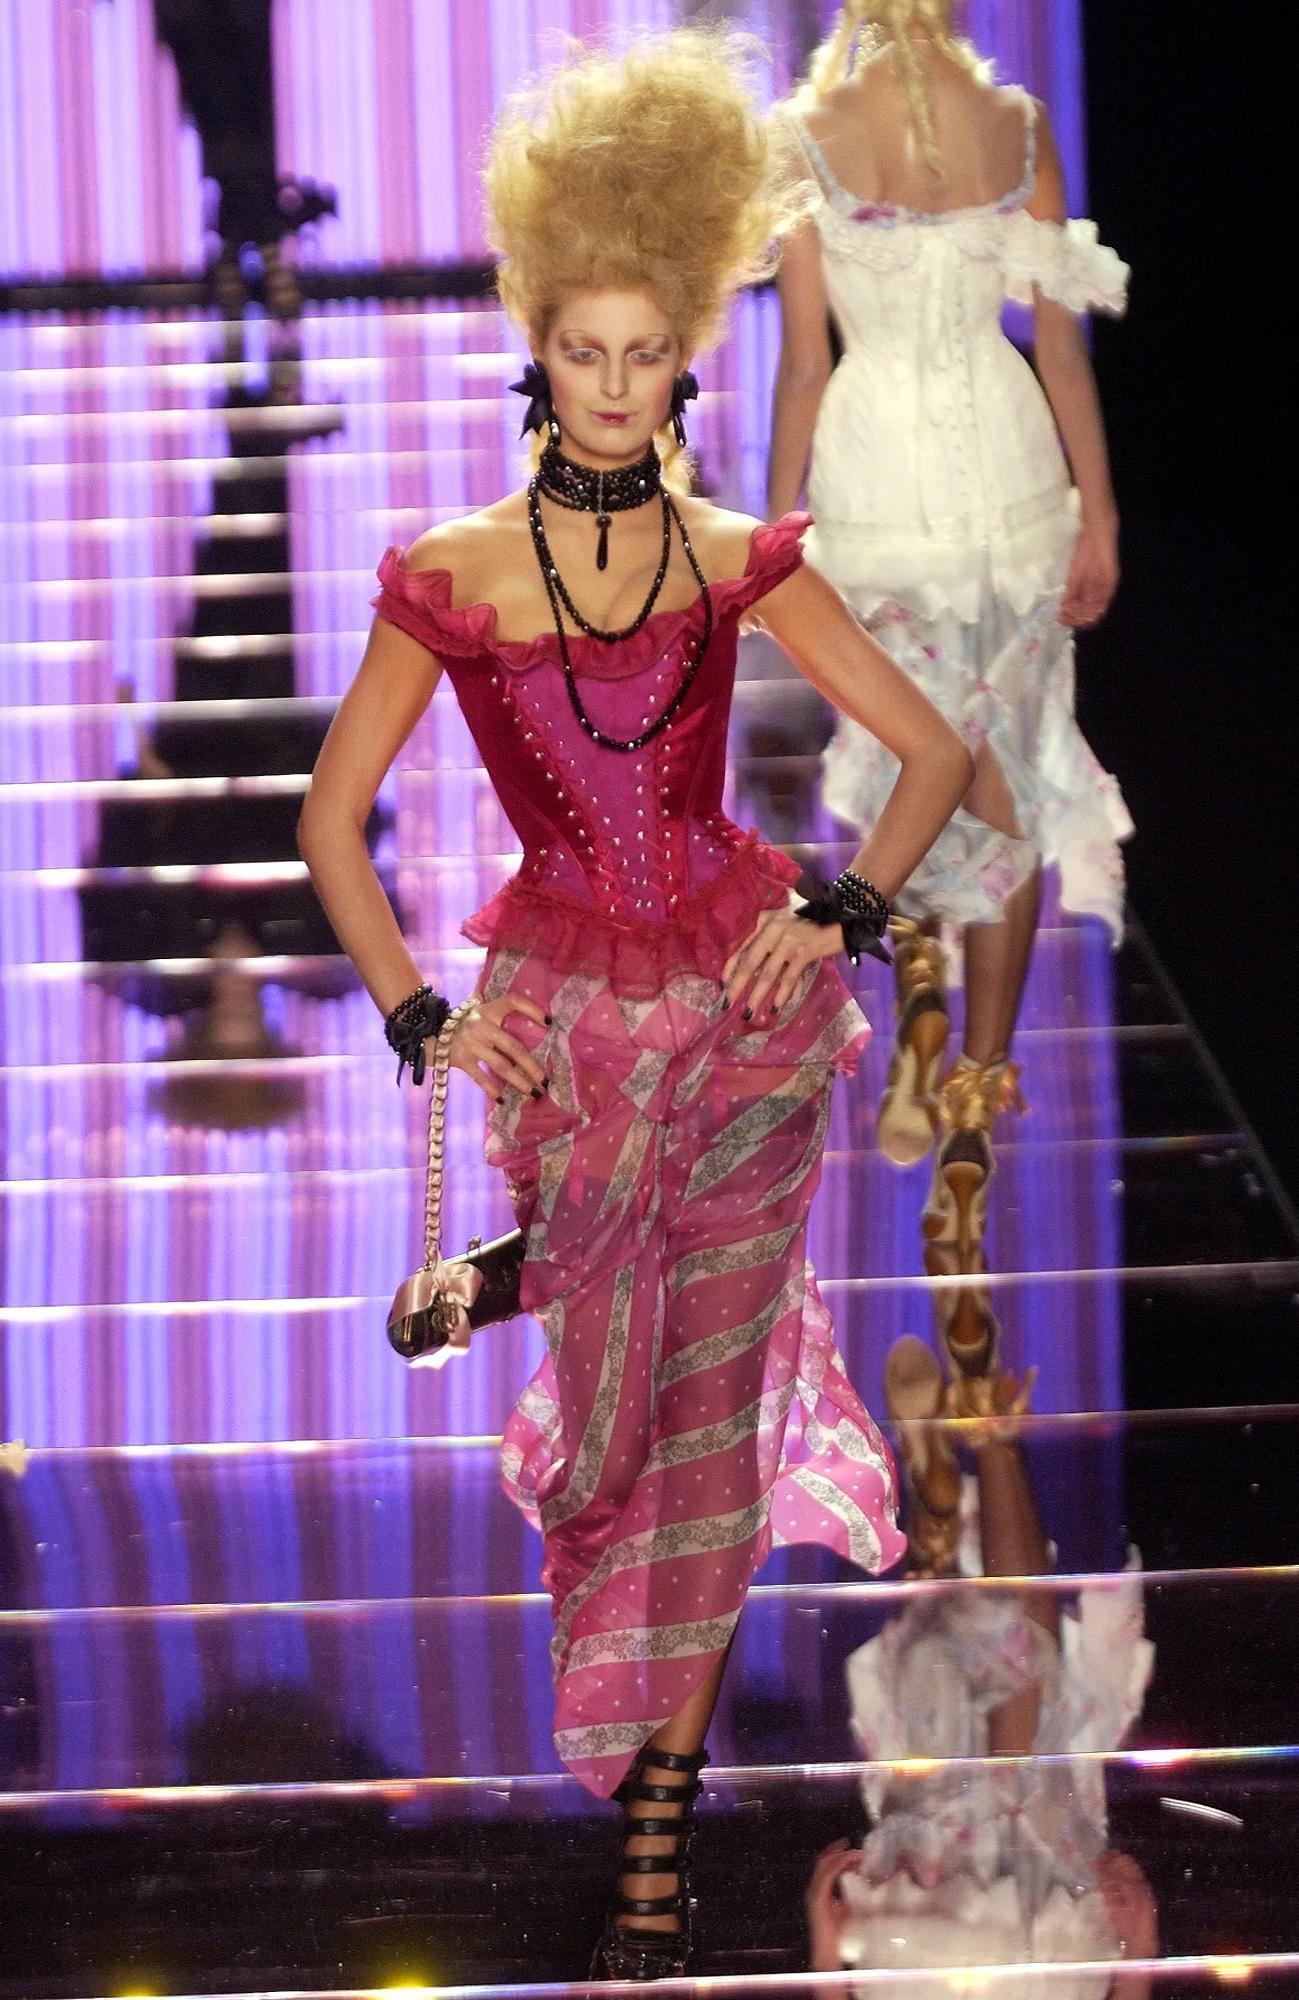 S/S 2004 John Galliano silk chiffon handkerchief hem slip gown with polka dot and lace pattern throughout. Vertical stripe alternating black and white lace paneling and pink and white polka dot paneling. Silk chiffon bias cut spaghetti strap slip